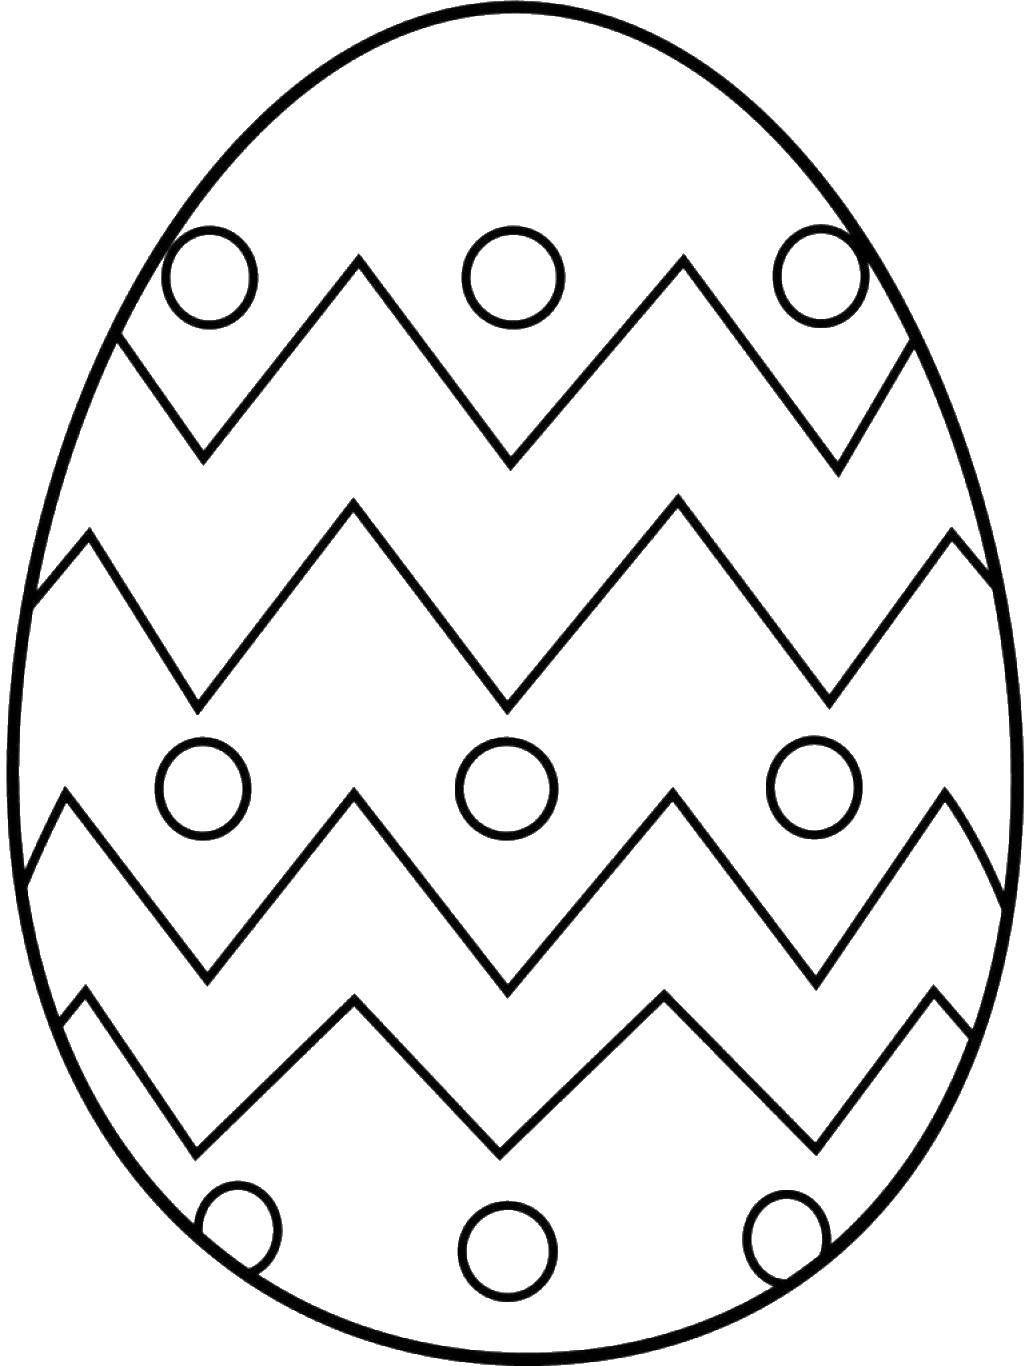 Coloring Decorated egg. Category Eggs. Tags:  eggs, Easter, patterns.